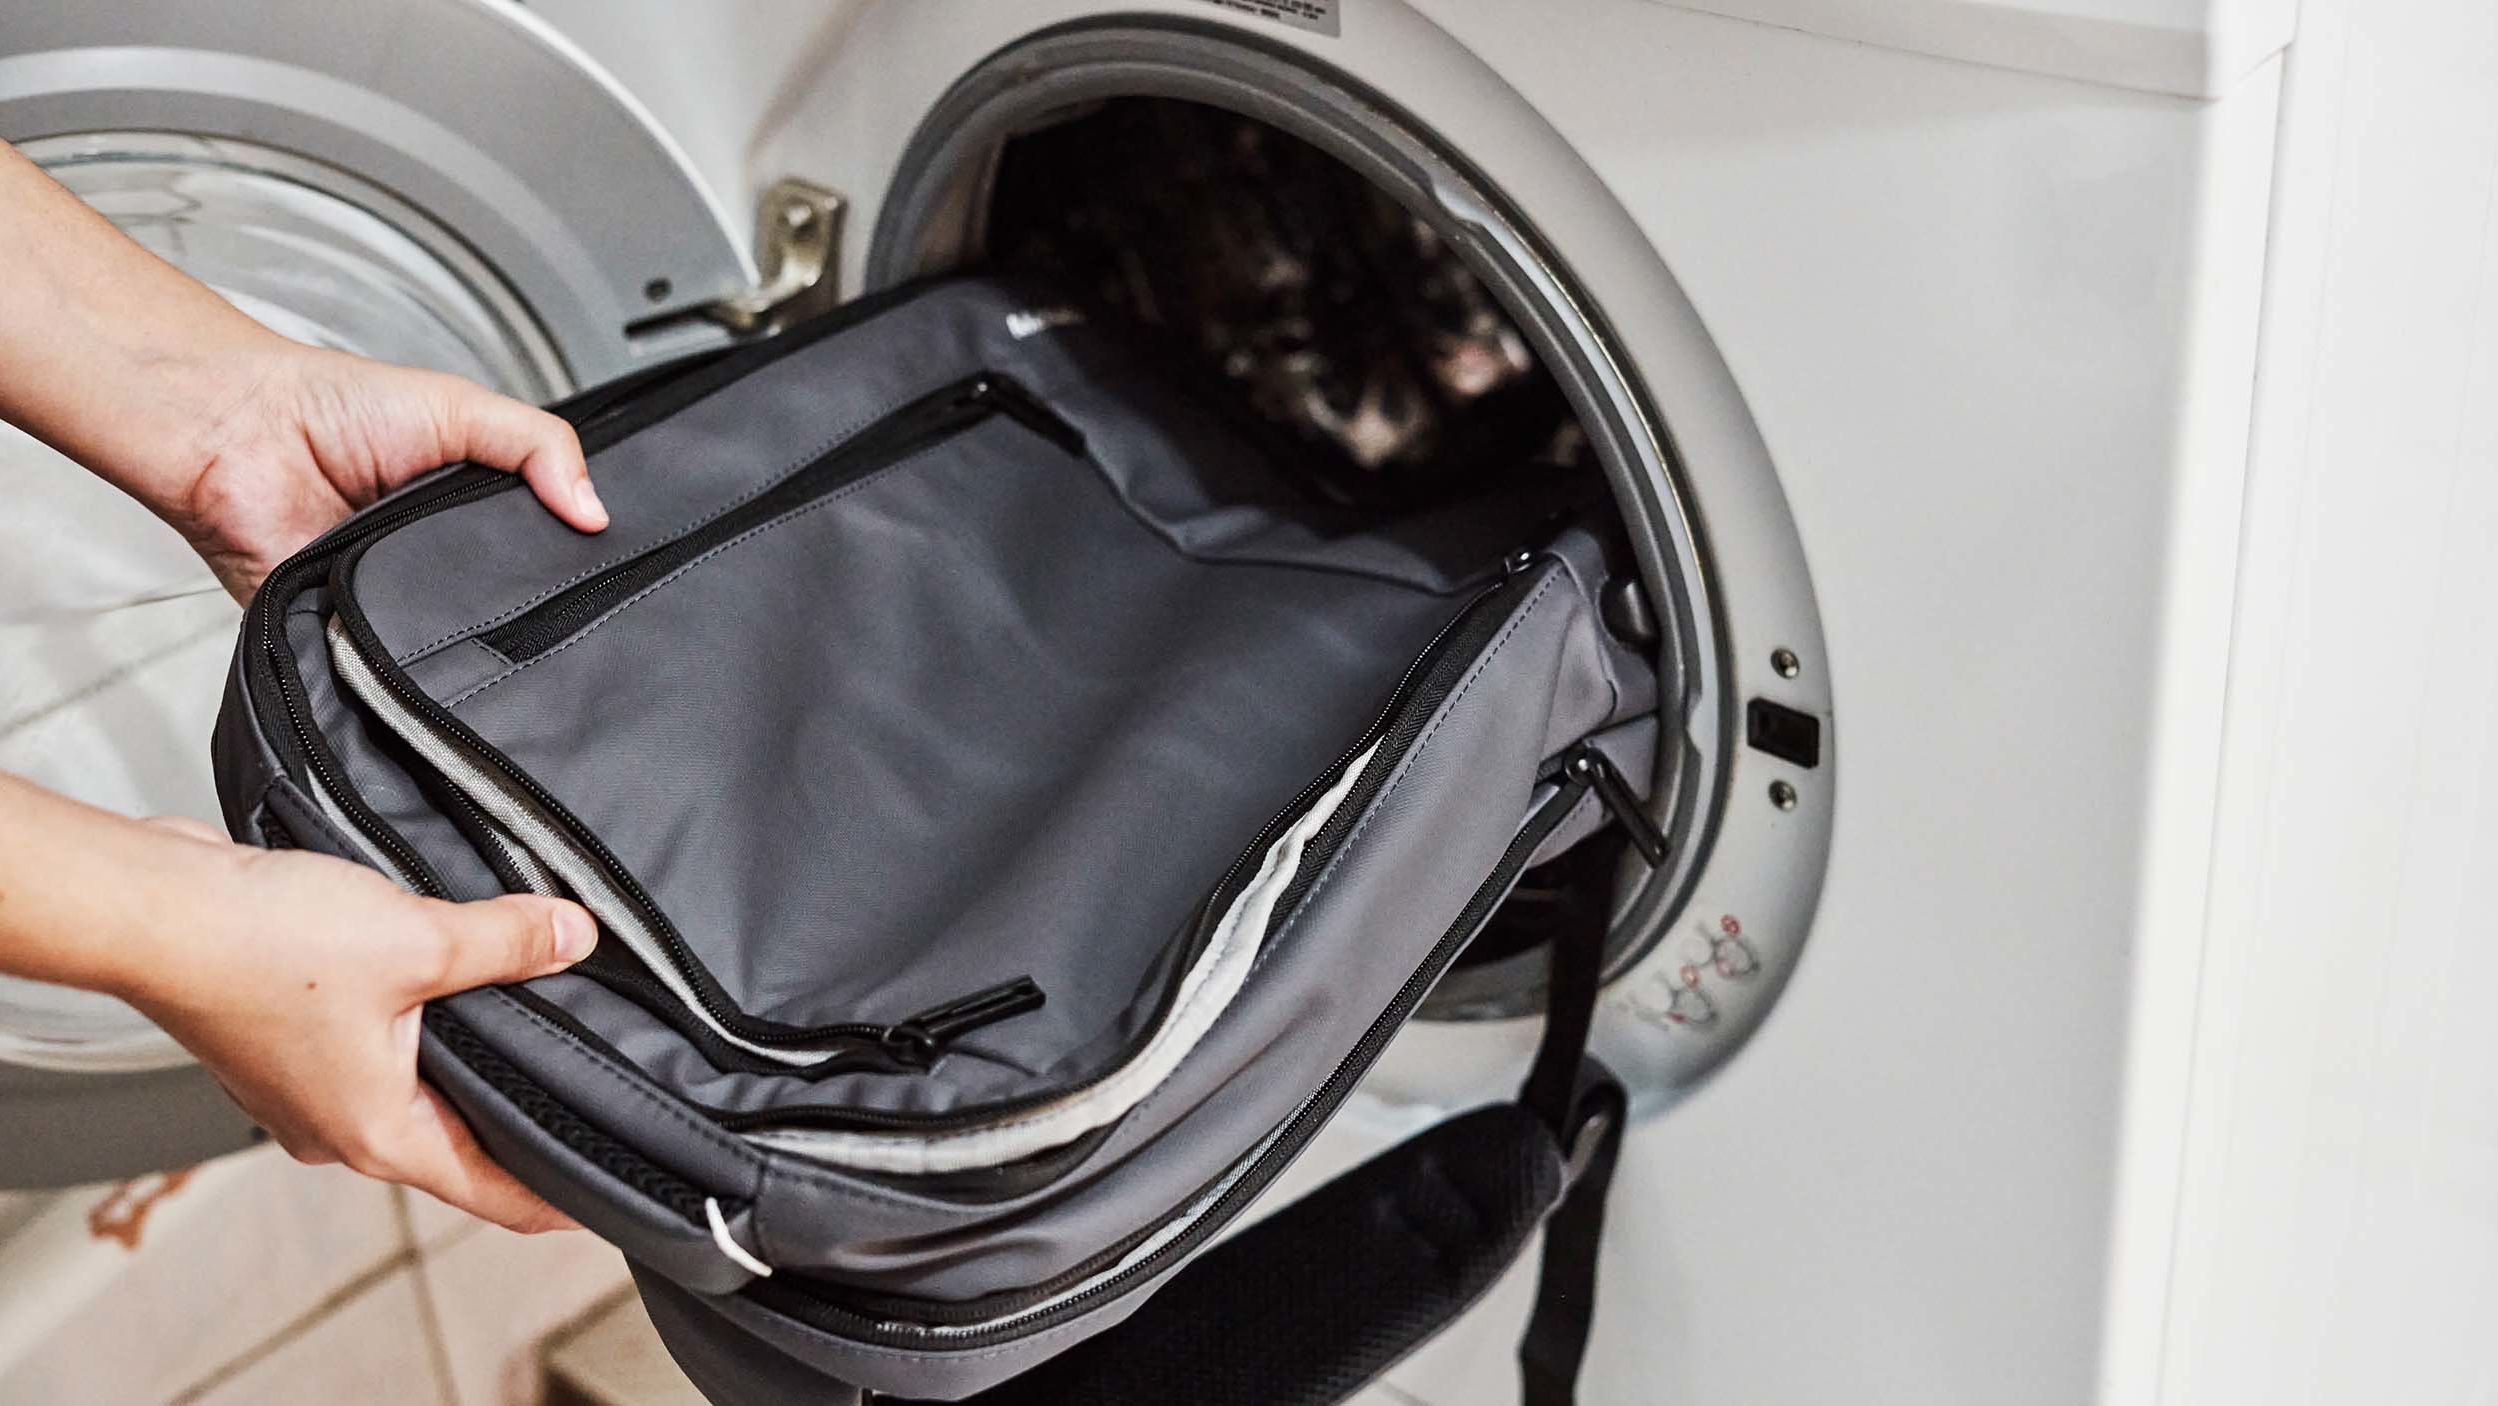 The Best Wash Travel Bags - Laundry Bags For Travel - The Broke